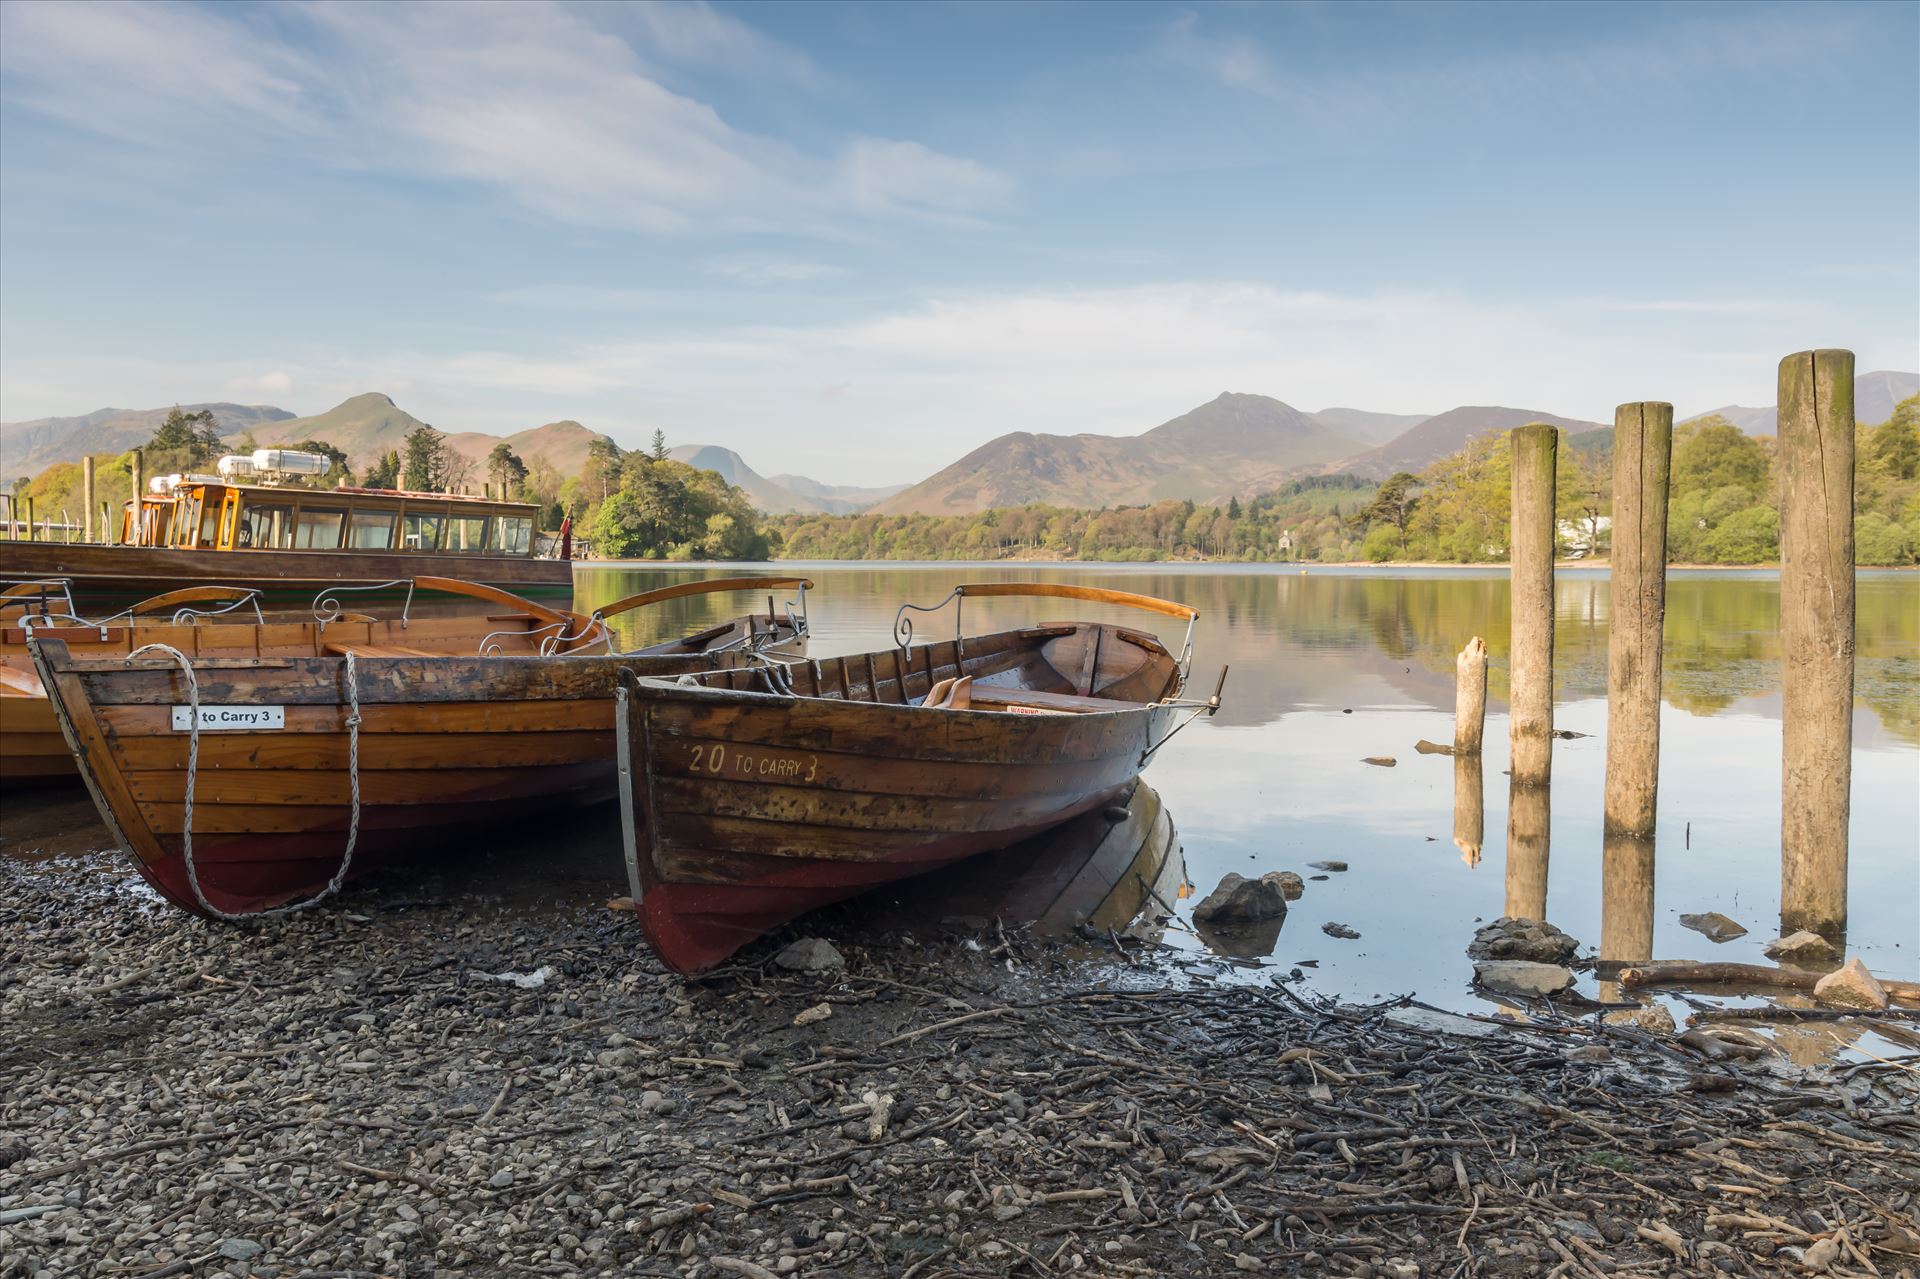 Derwentwater, nr Keswick Derwentwater is one of the principal bodies of water in the Lake District National Park in north west England. by philreay